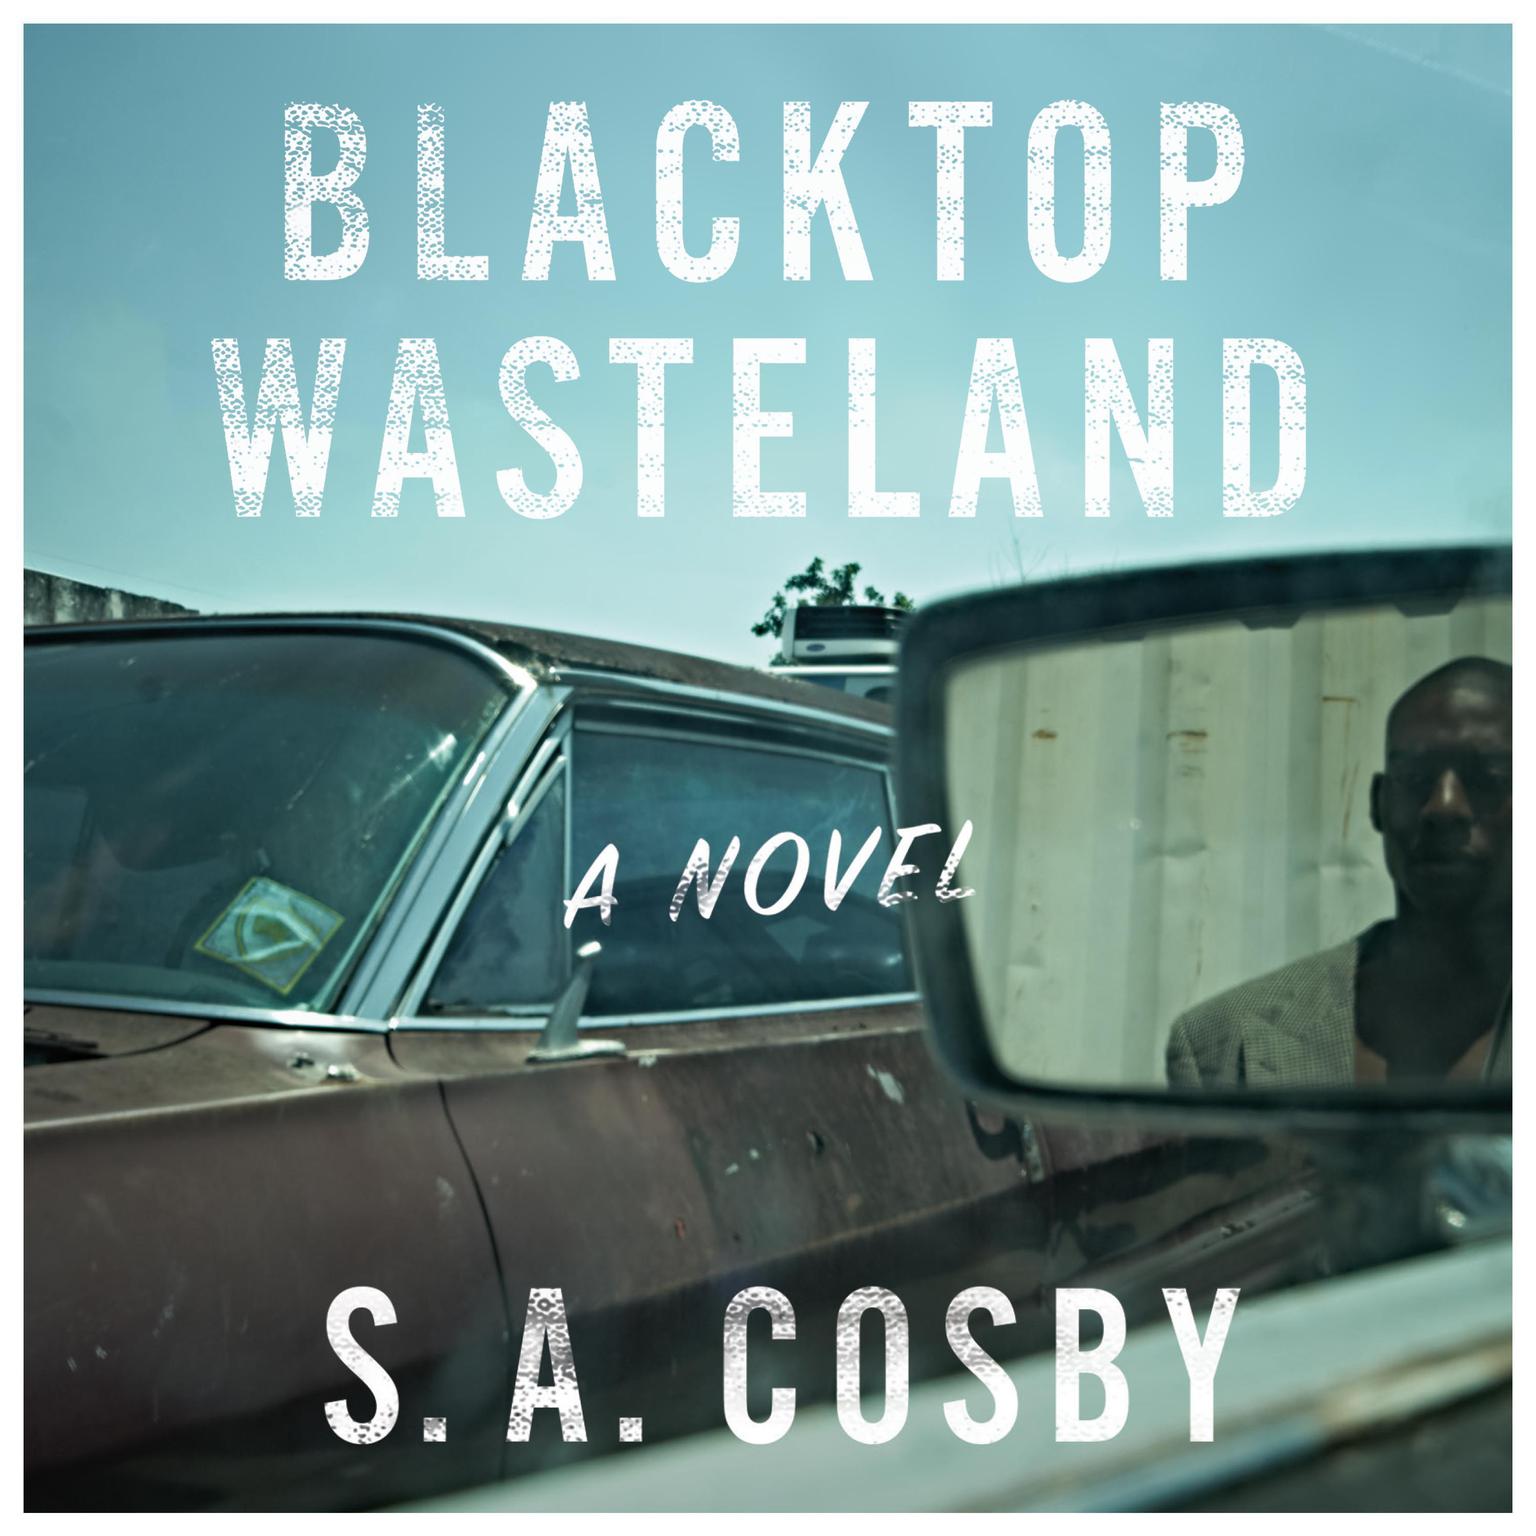 Blacktop Wasteland: A Novel Audiobook, by S. A. Cosby